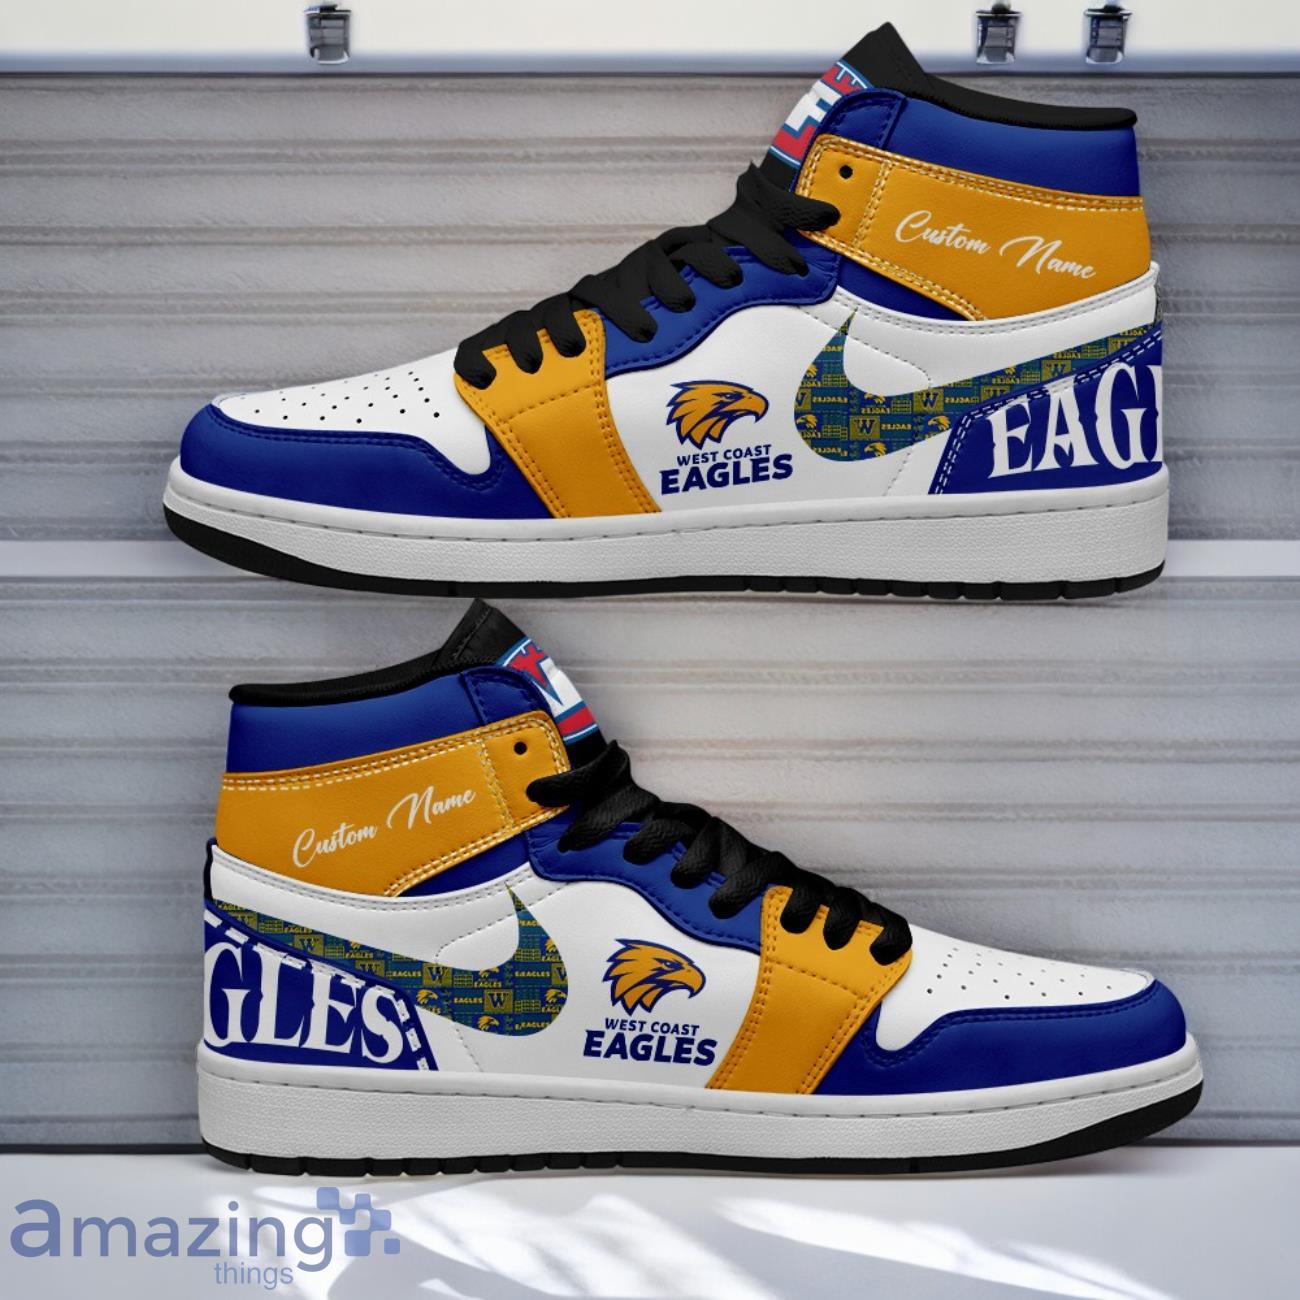 West Coast Eagles AFL Air Jordan Hightop Shoes Custom Name Gift For Fans Product Photo 1